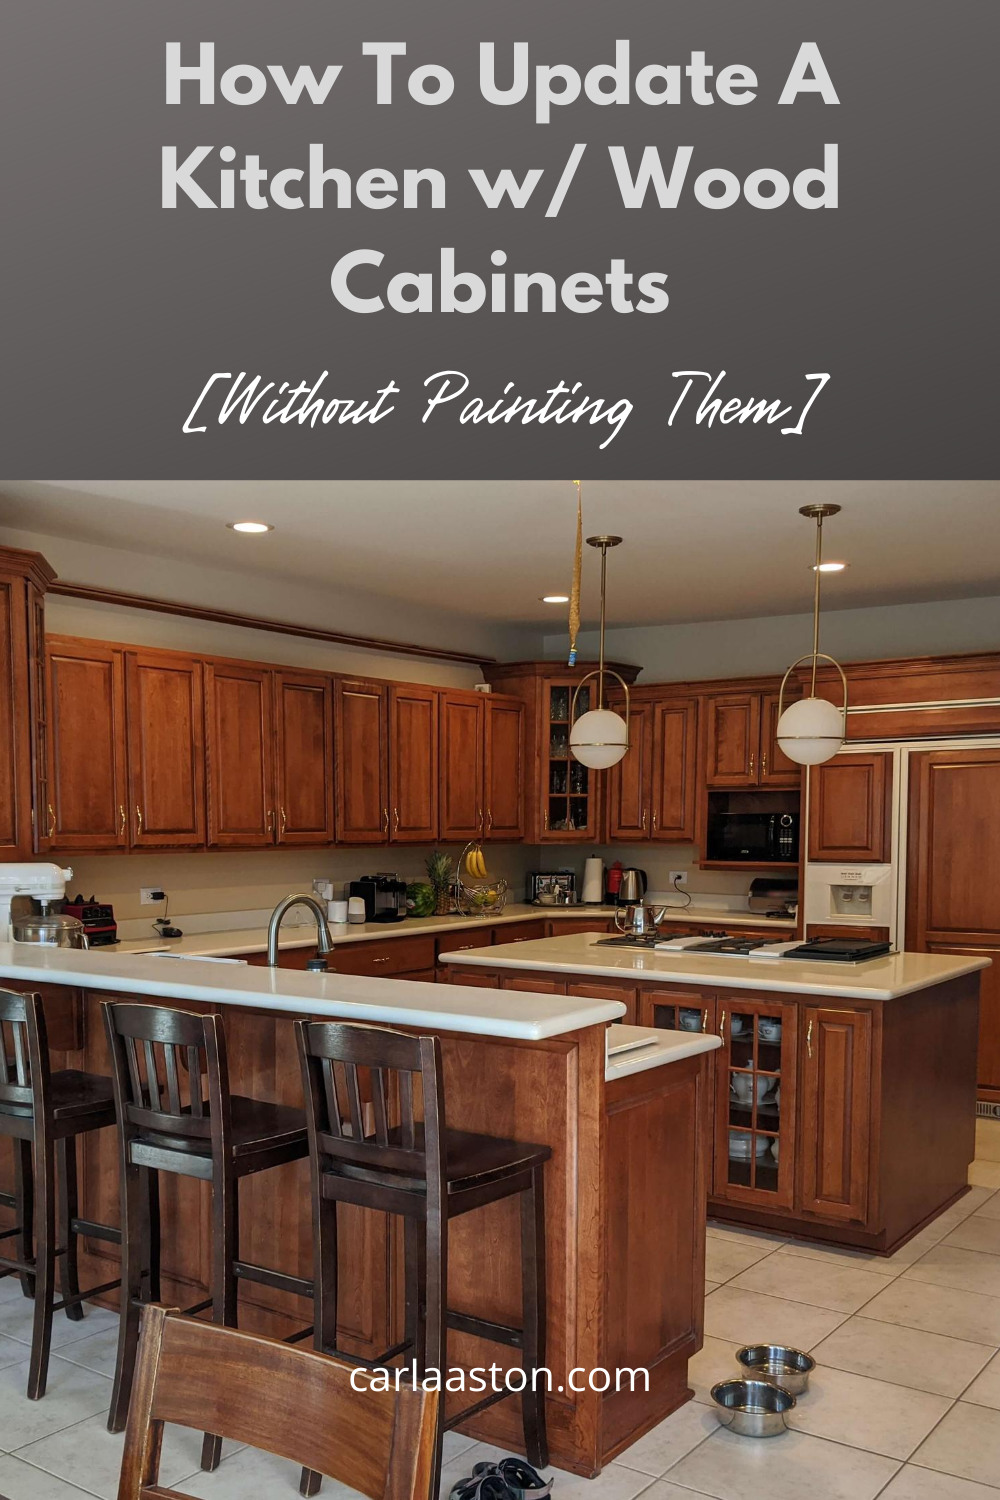 Wood Cabinets Without Painting, Updating Kitchen Cabinets Without Painting